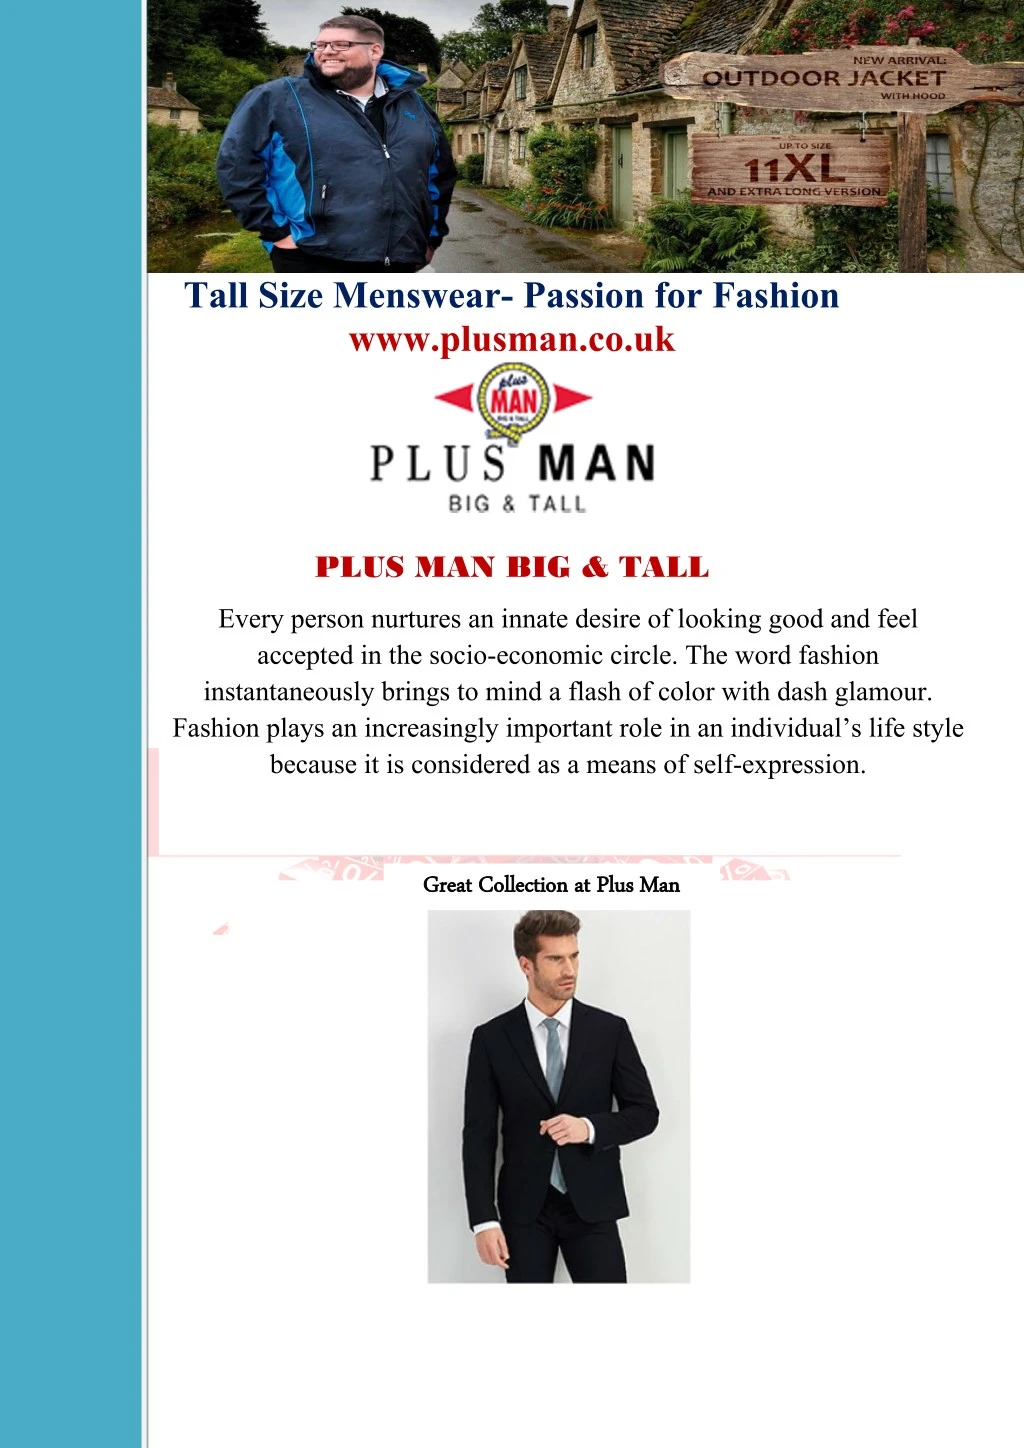 tall size menswear passion for fashion